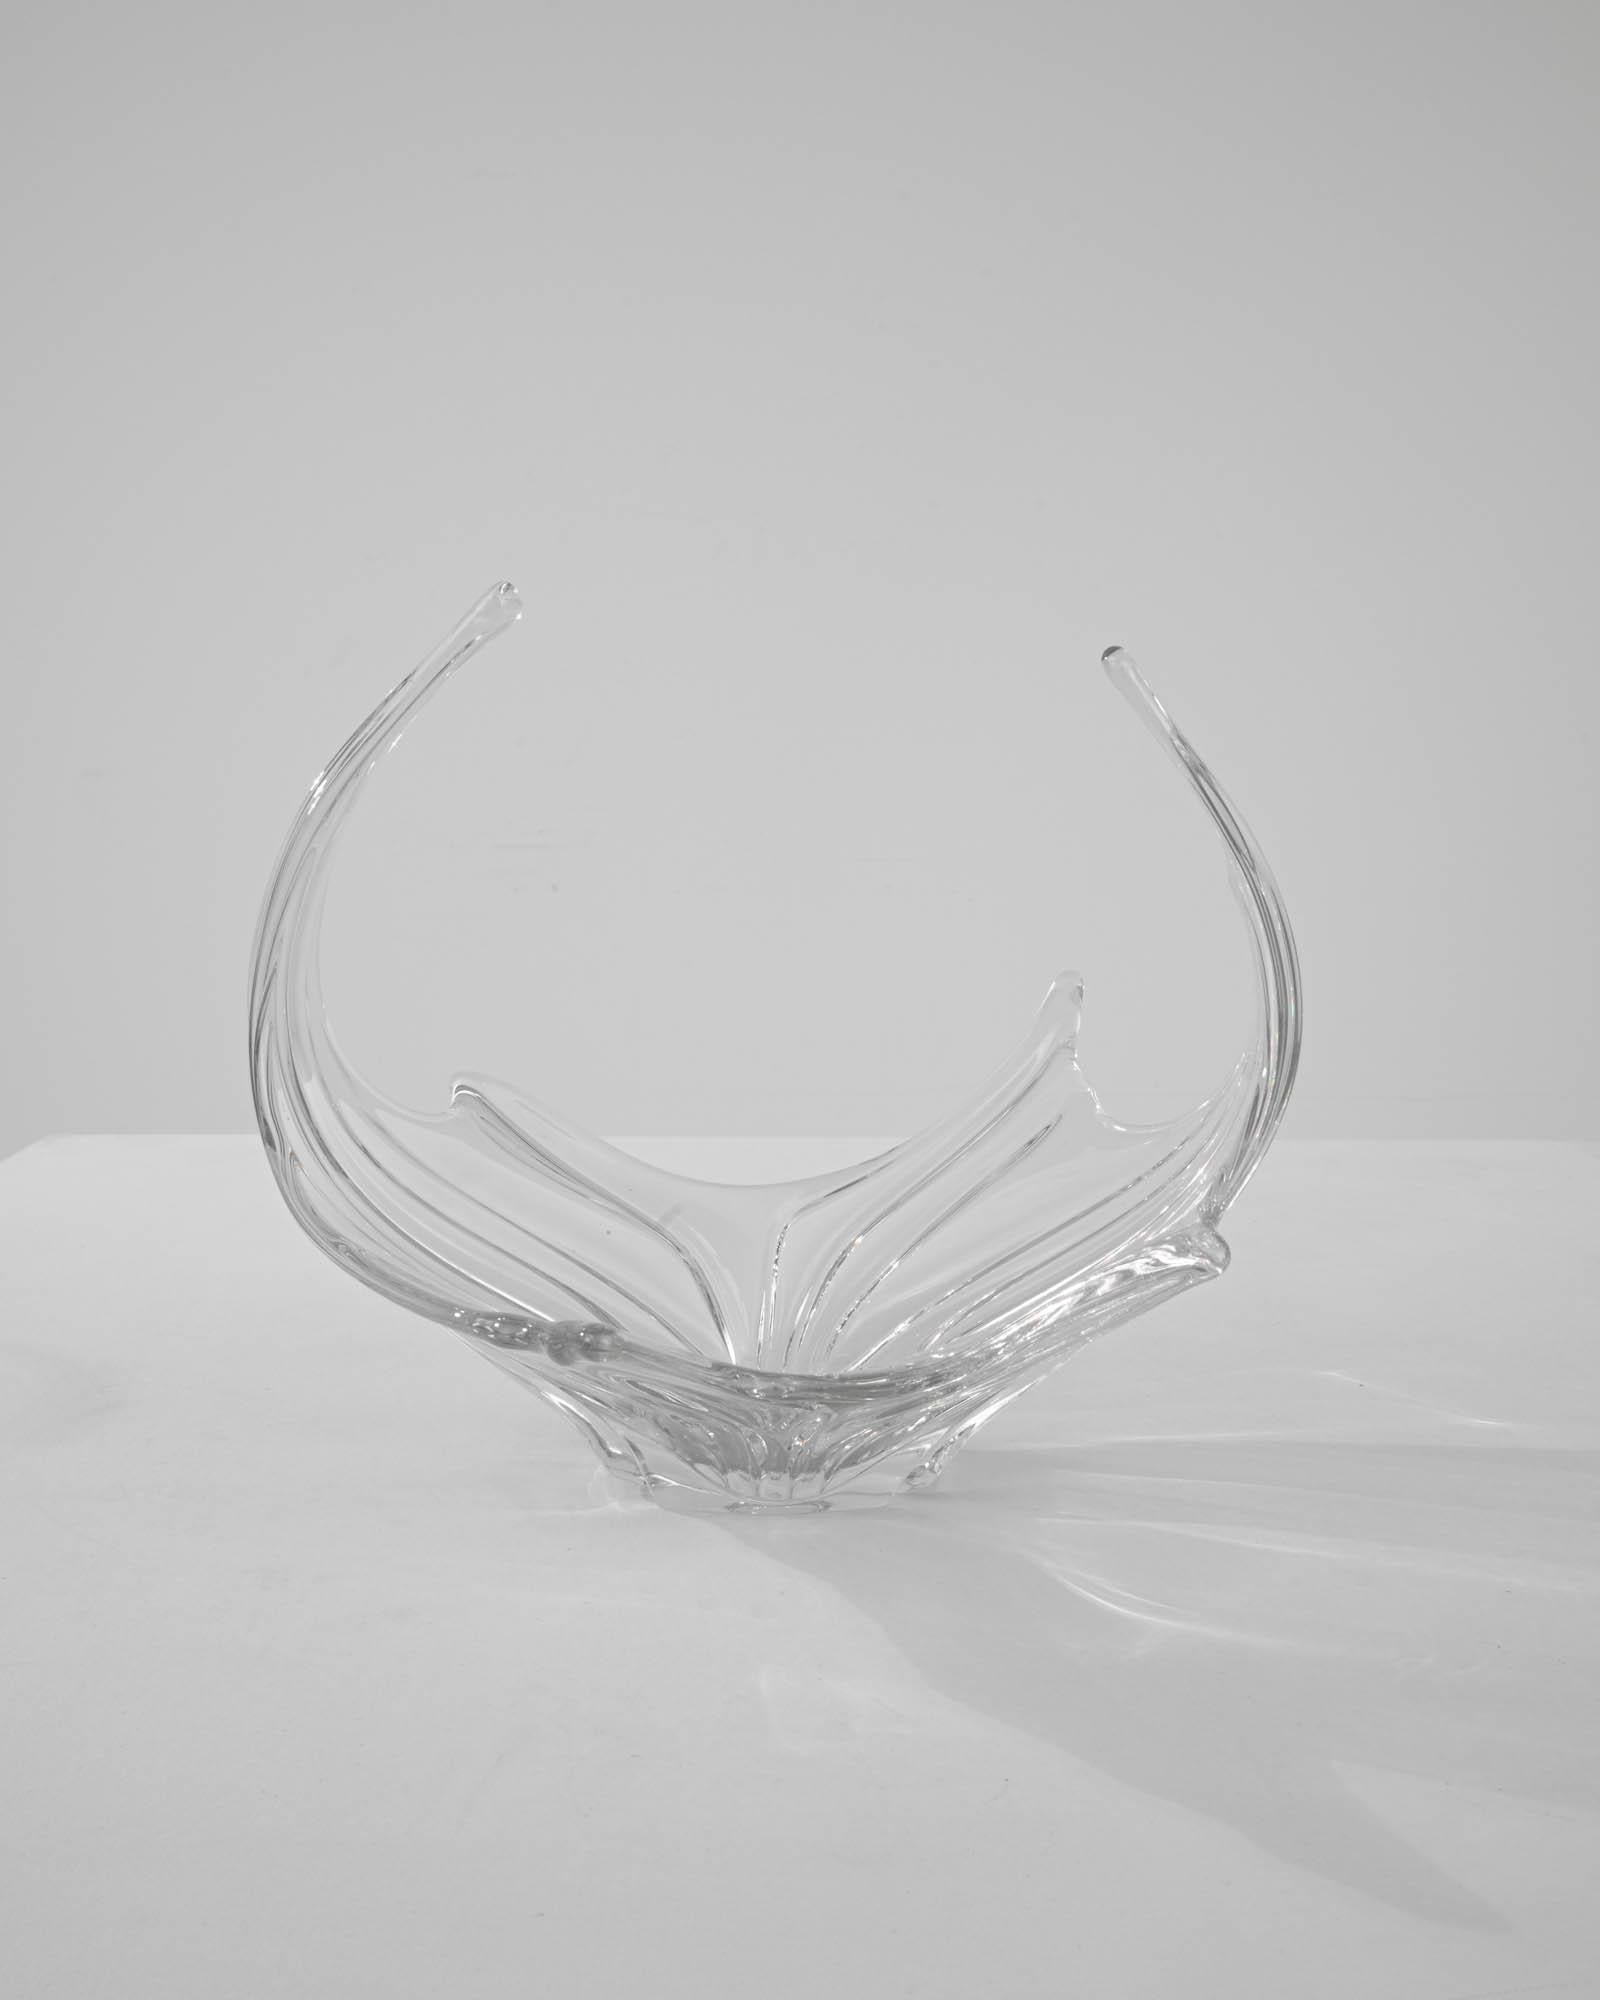 Coming from the expertise of glassmaking in Italy, this plateau is a sophisticated and gracious piece to decorate a tabletop. Following shapes inspired by nature, mimicking the flow and gravity of a fluttering leaf. As a fruit basket meant to enjoy